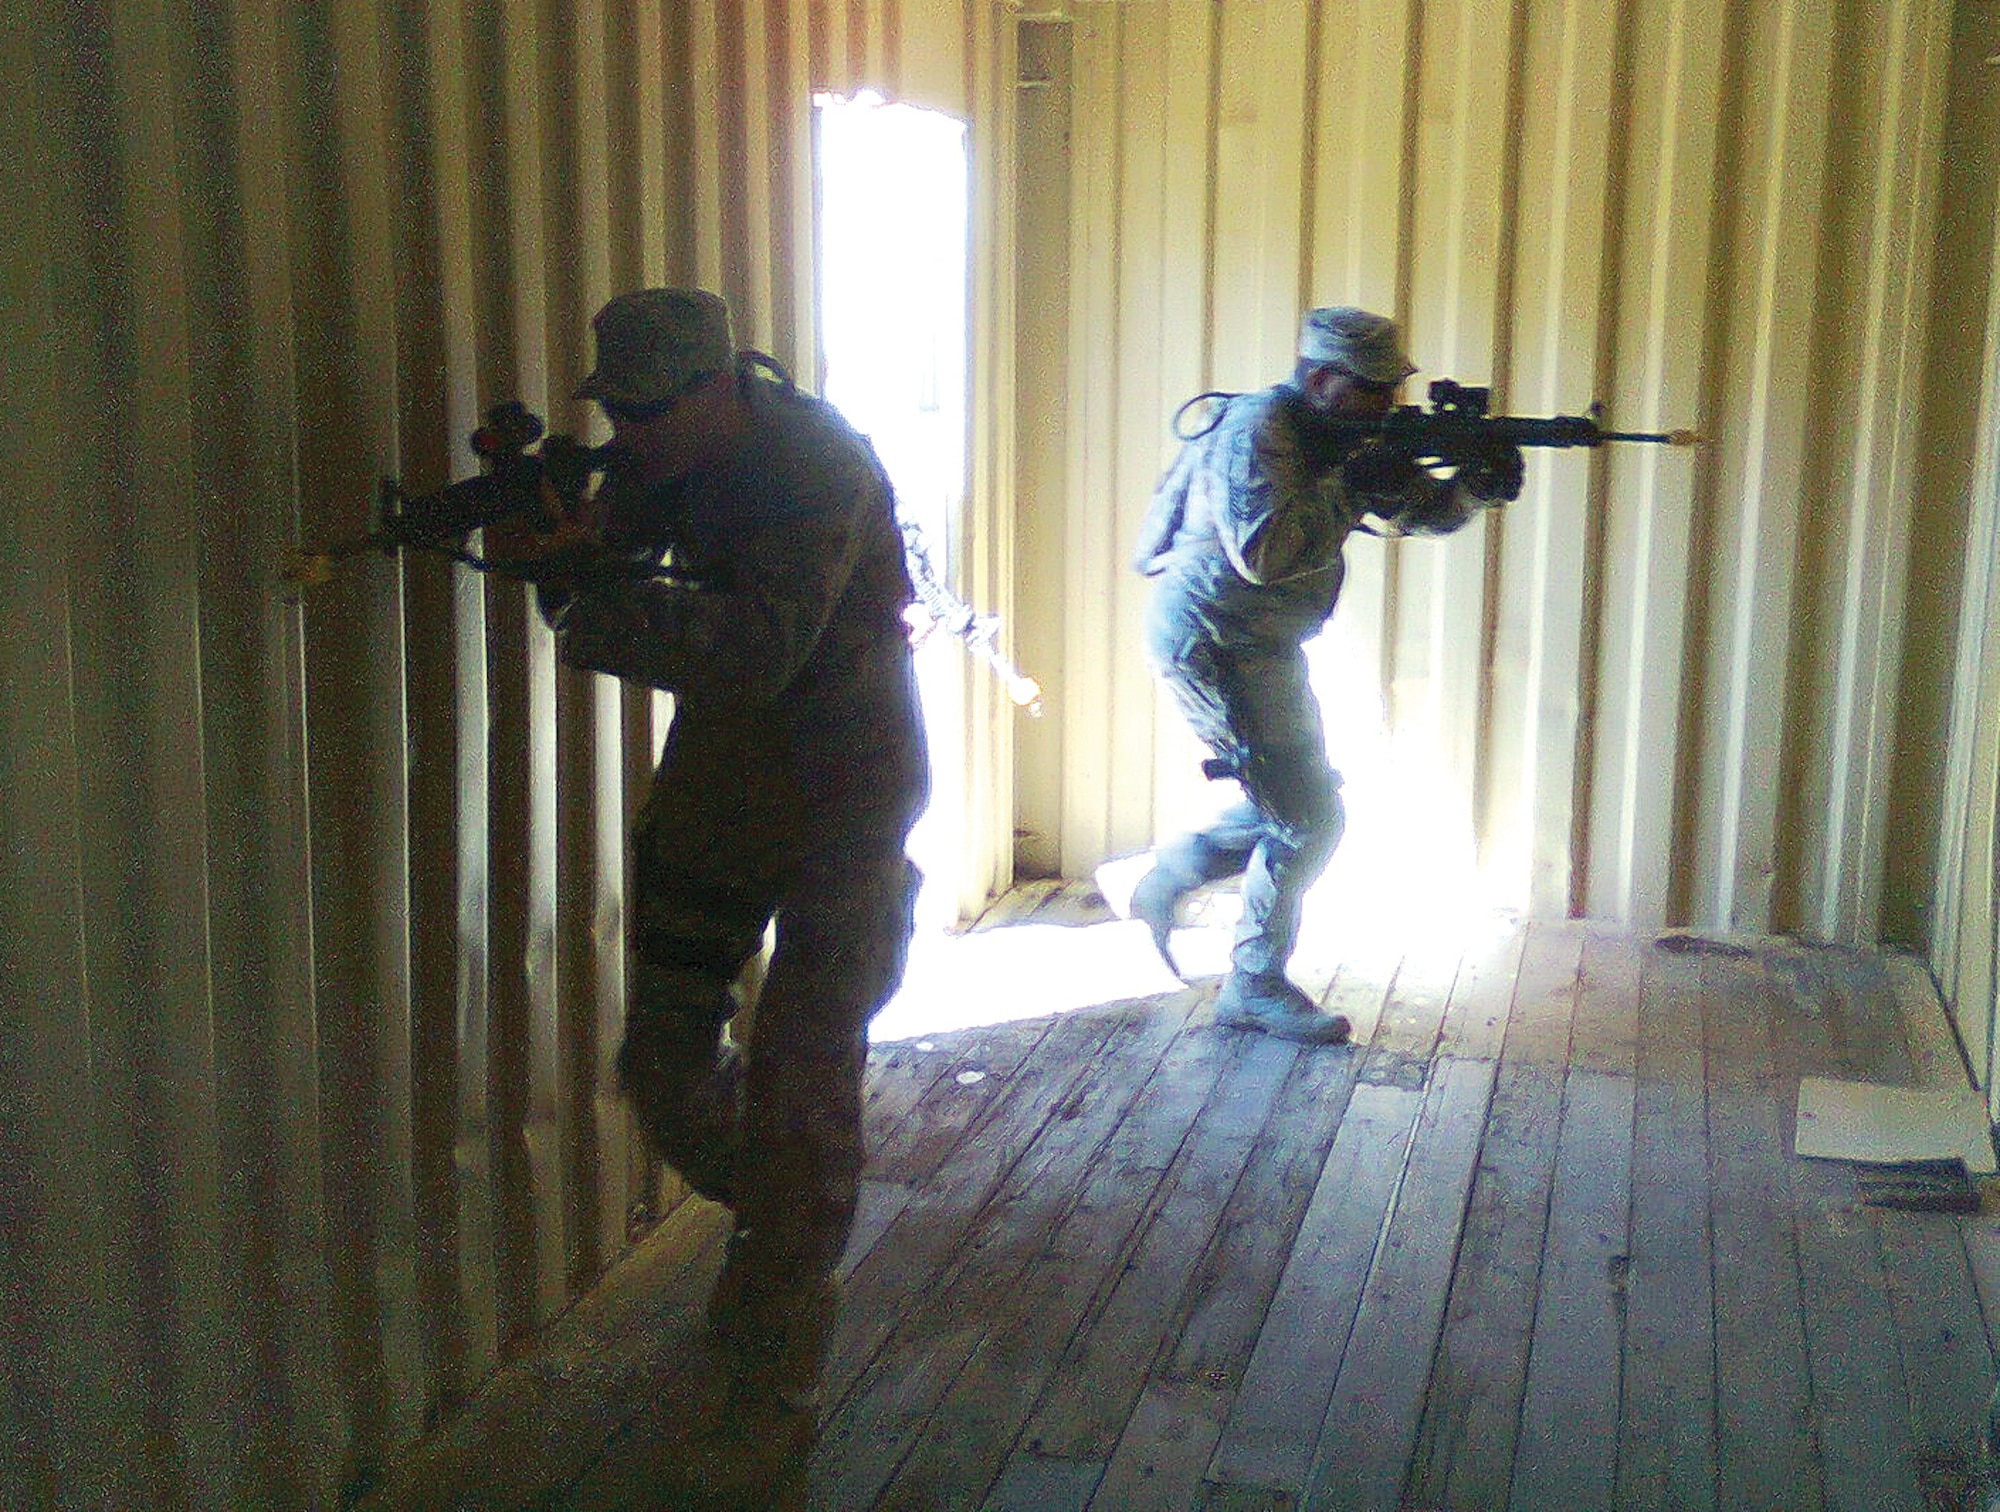 Airman Brian Tice and Tech. Sgt. Steven Higginbotham practice room clearing during the urban operations phase of Patriot Defender training.